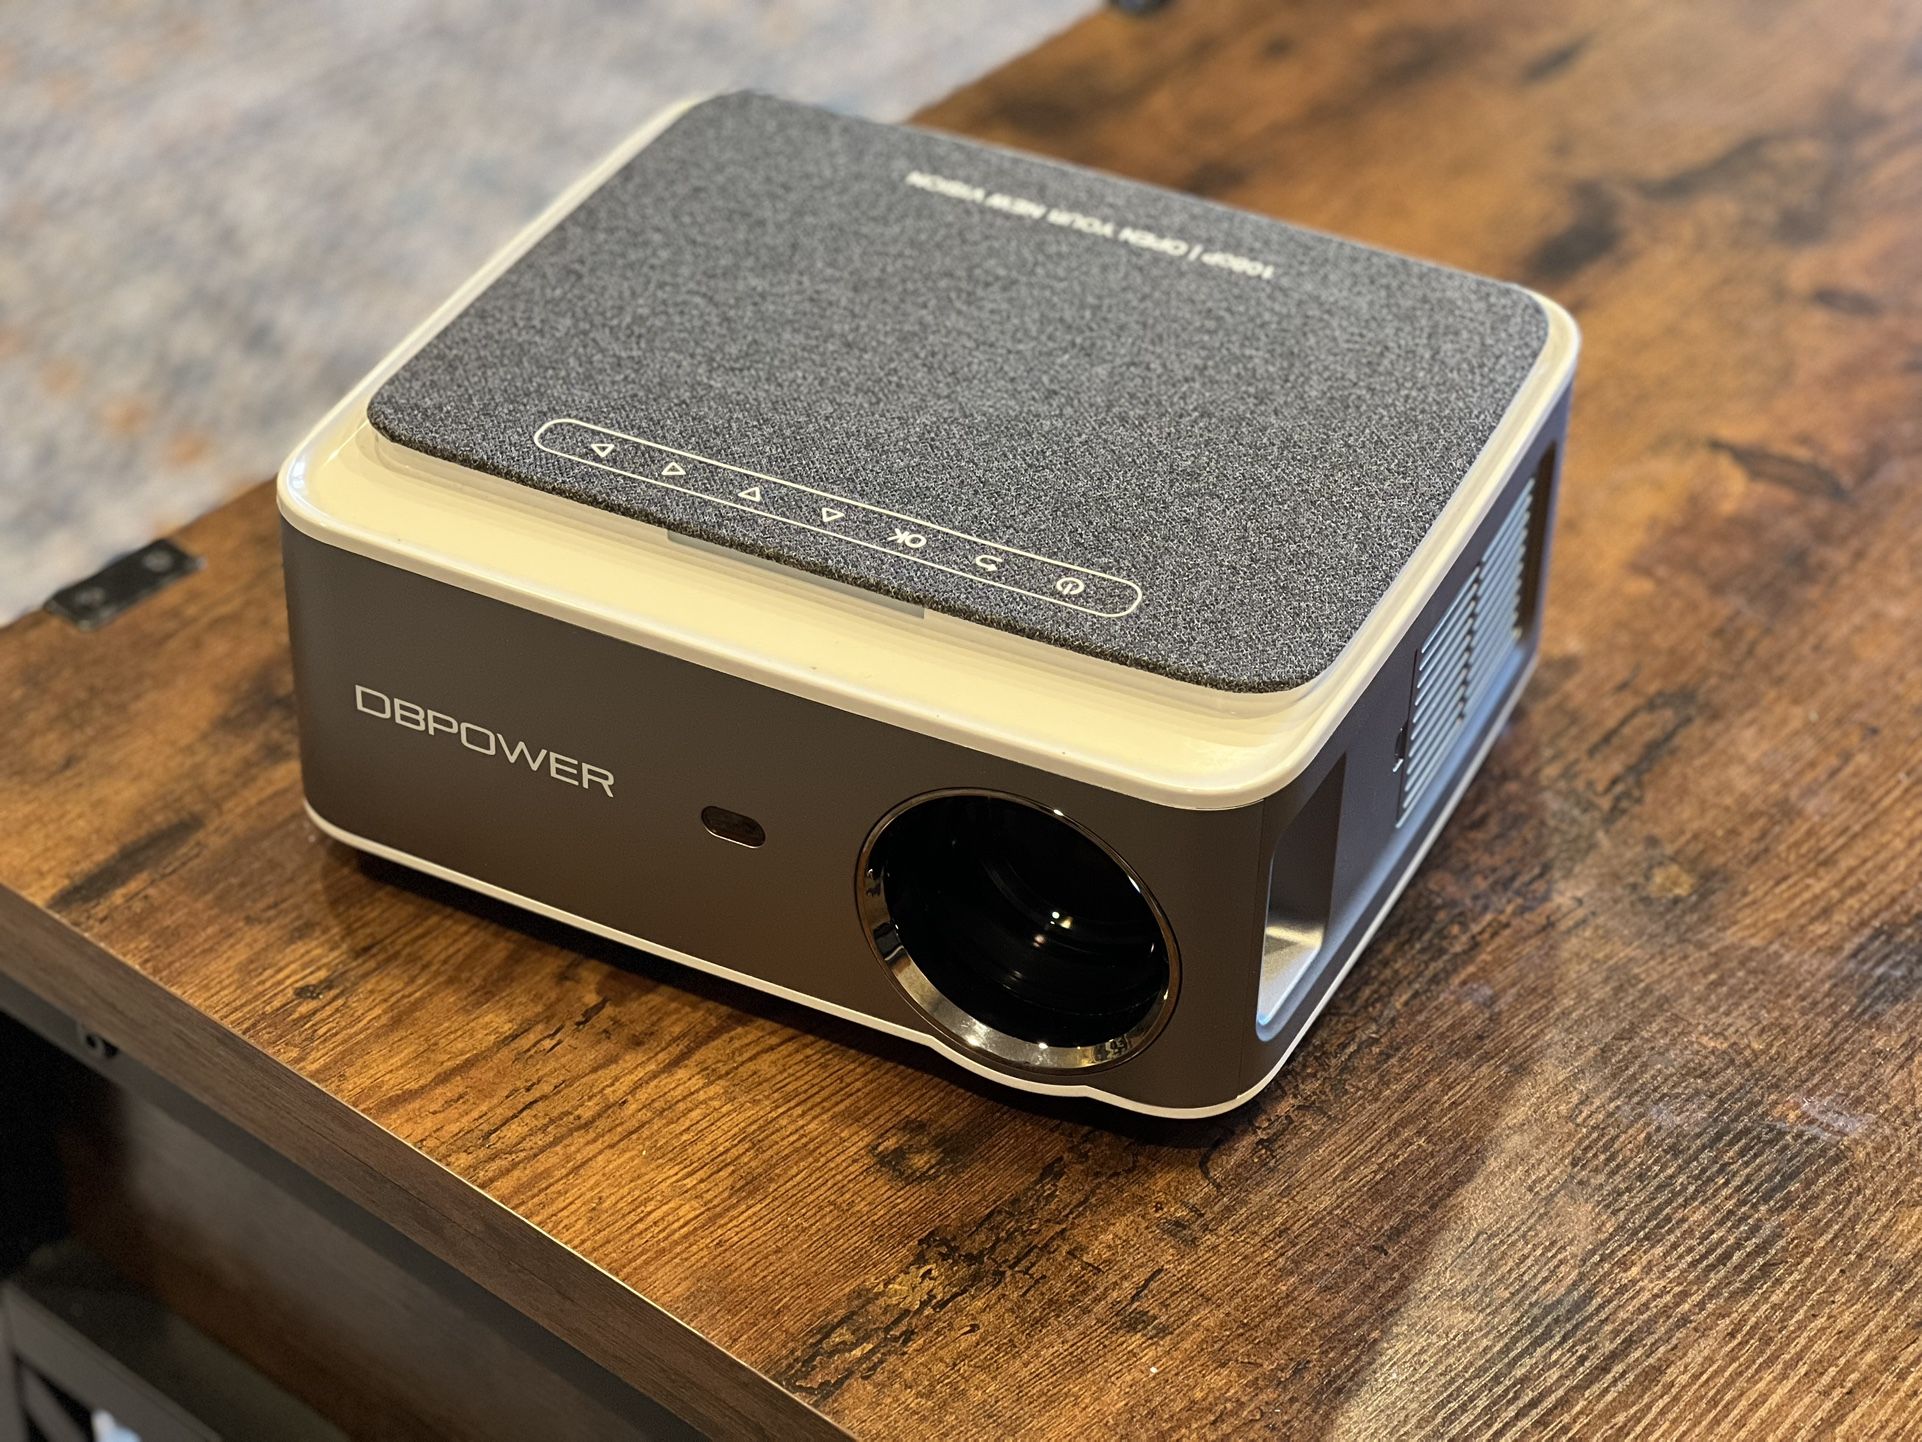 DBPOWER rd828 Projector